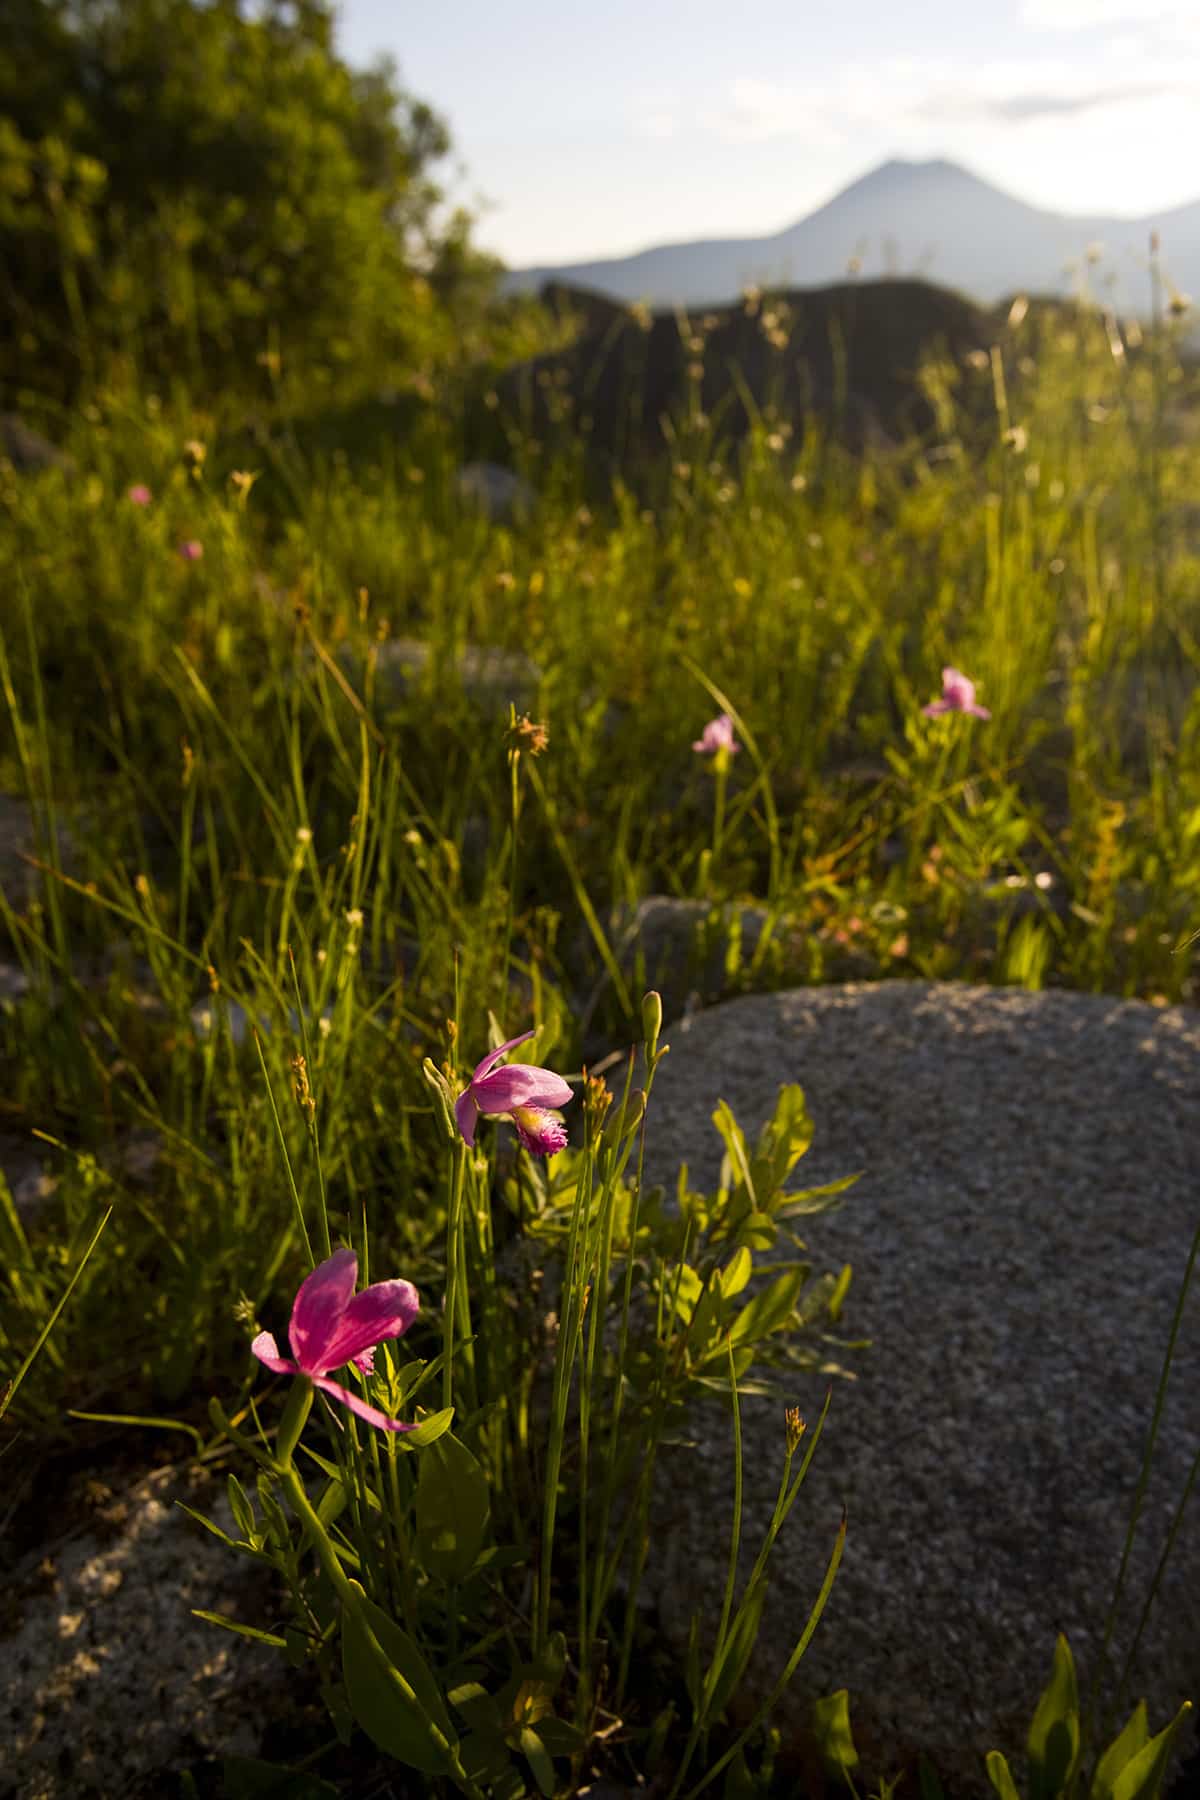 Arethusa Orchids, Arethusa bulbosa, near the outlet of Katahdin Lake near Maine's Baxter State Park. Mount Katahdin is in the distance.